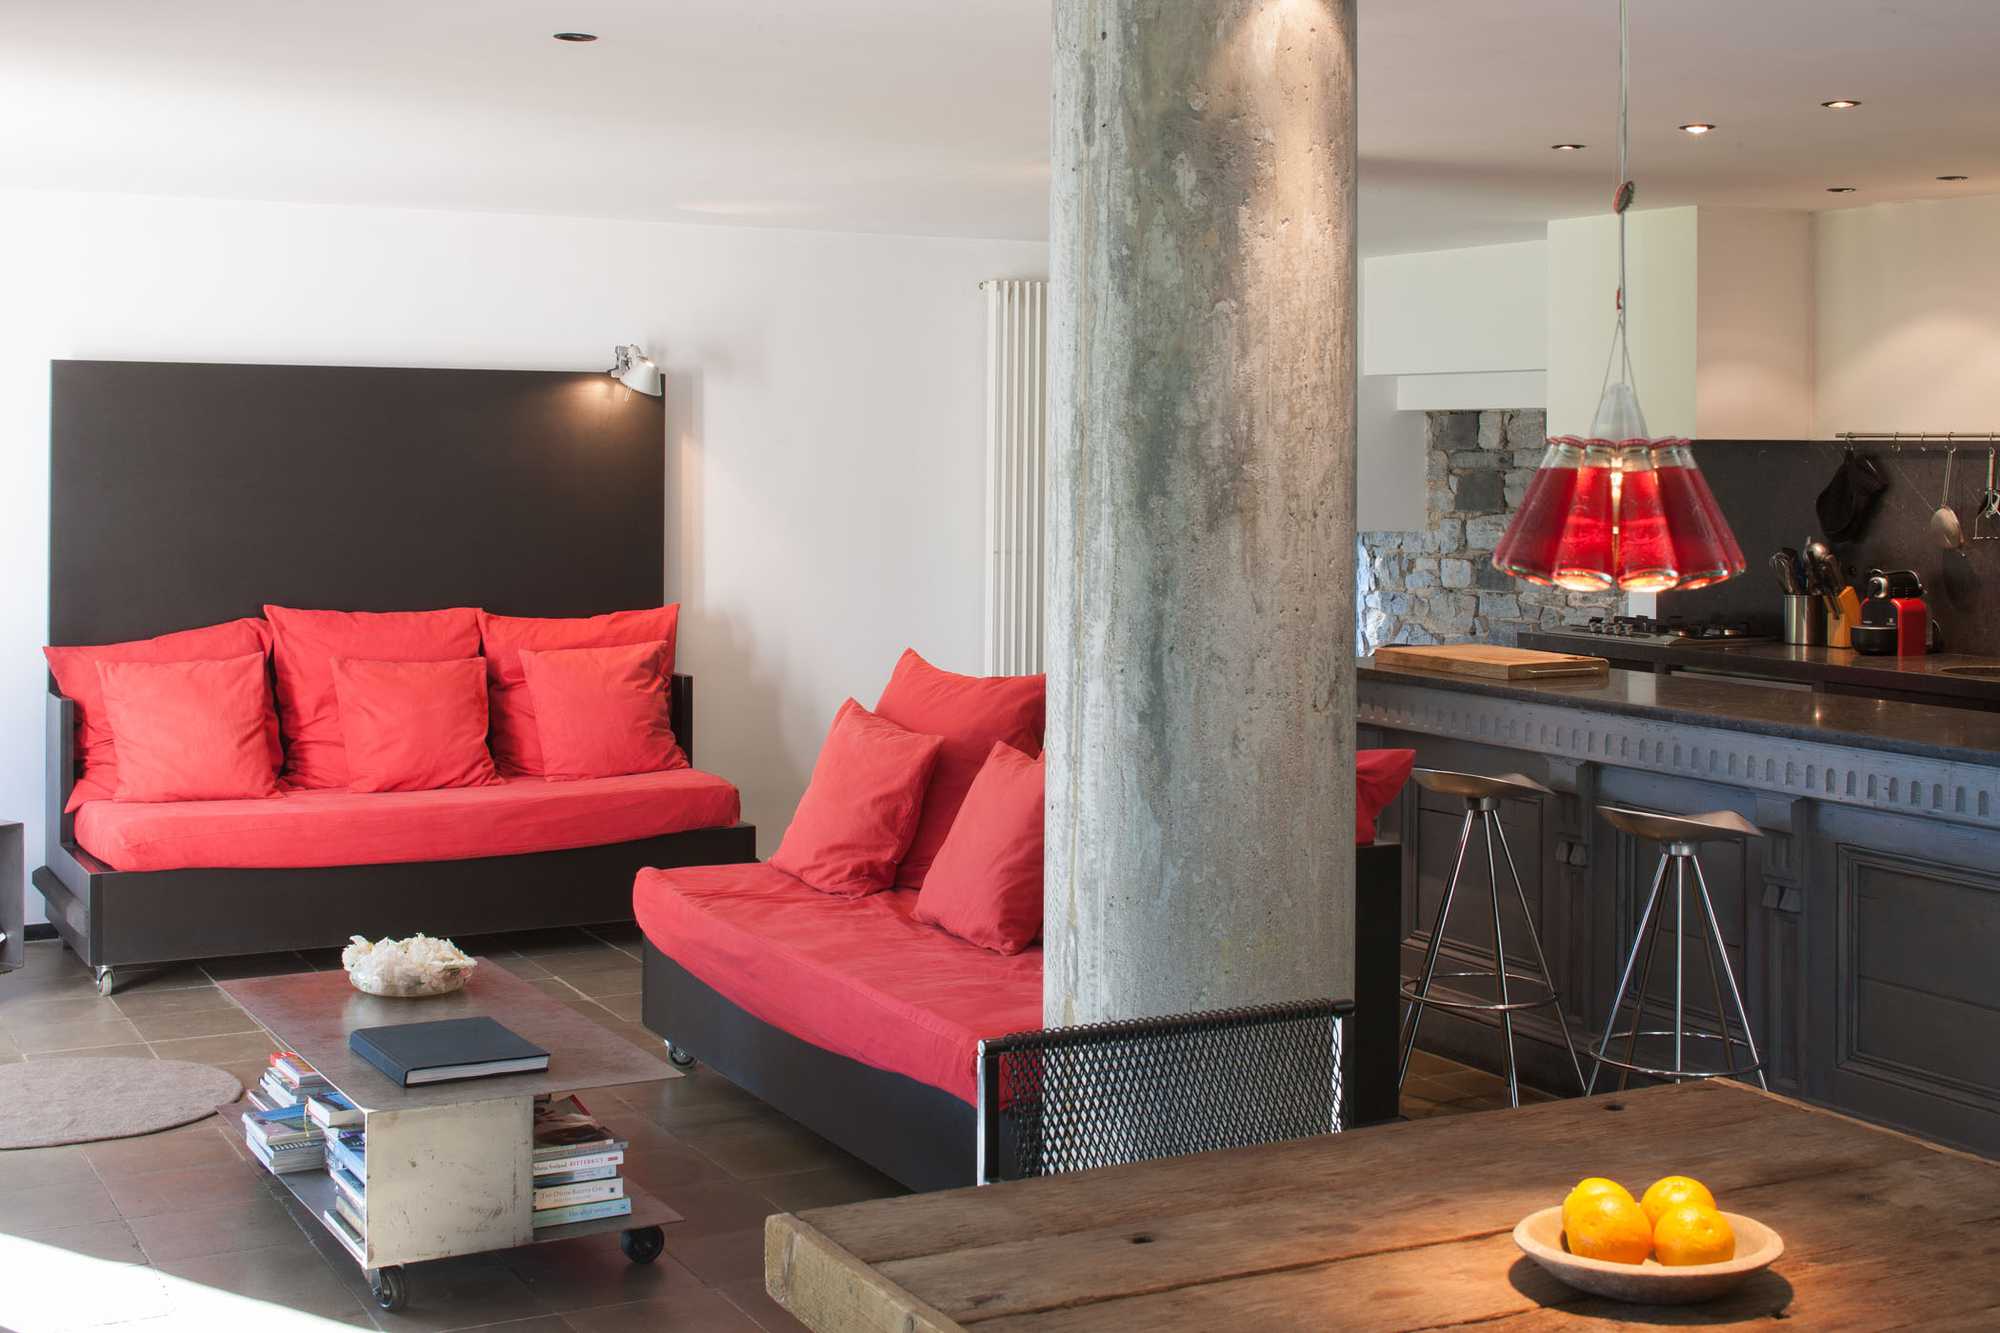 LA CARRIERE Les Duves, contemporary loft in a mill at